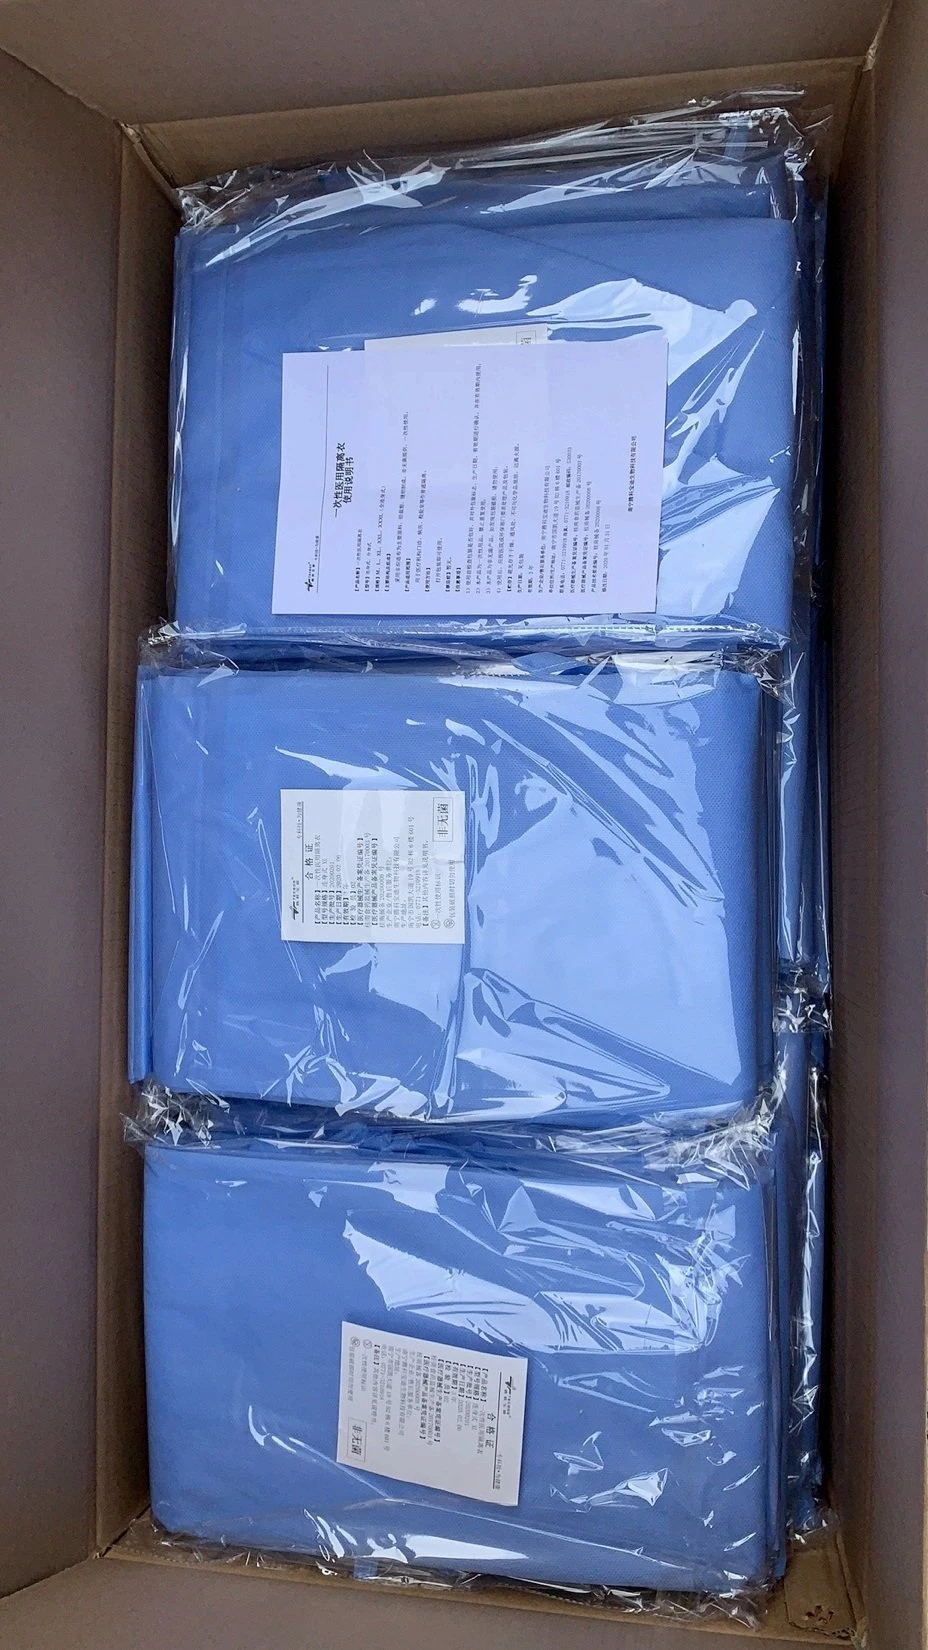 Disposable Chemical Protective Clothing Product Supply Against Splashes with Blue Strips Surgical Isolation Gown